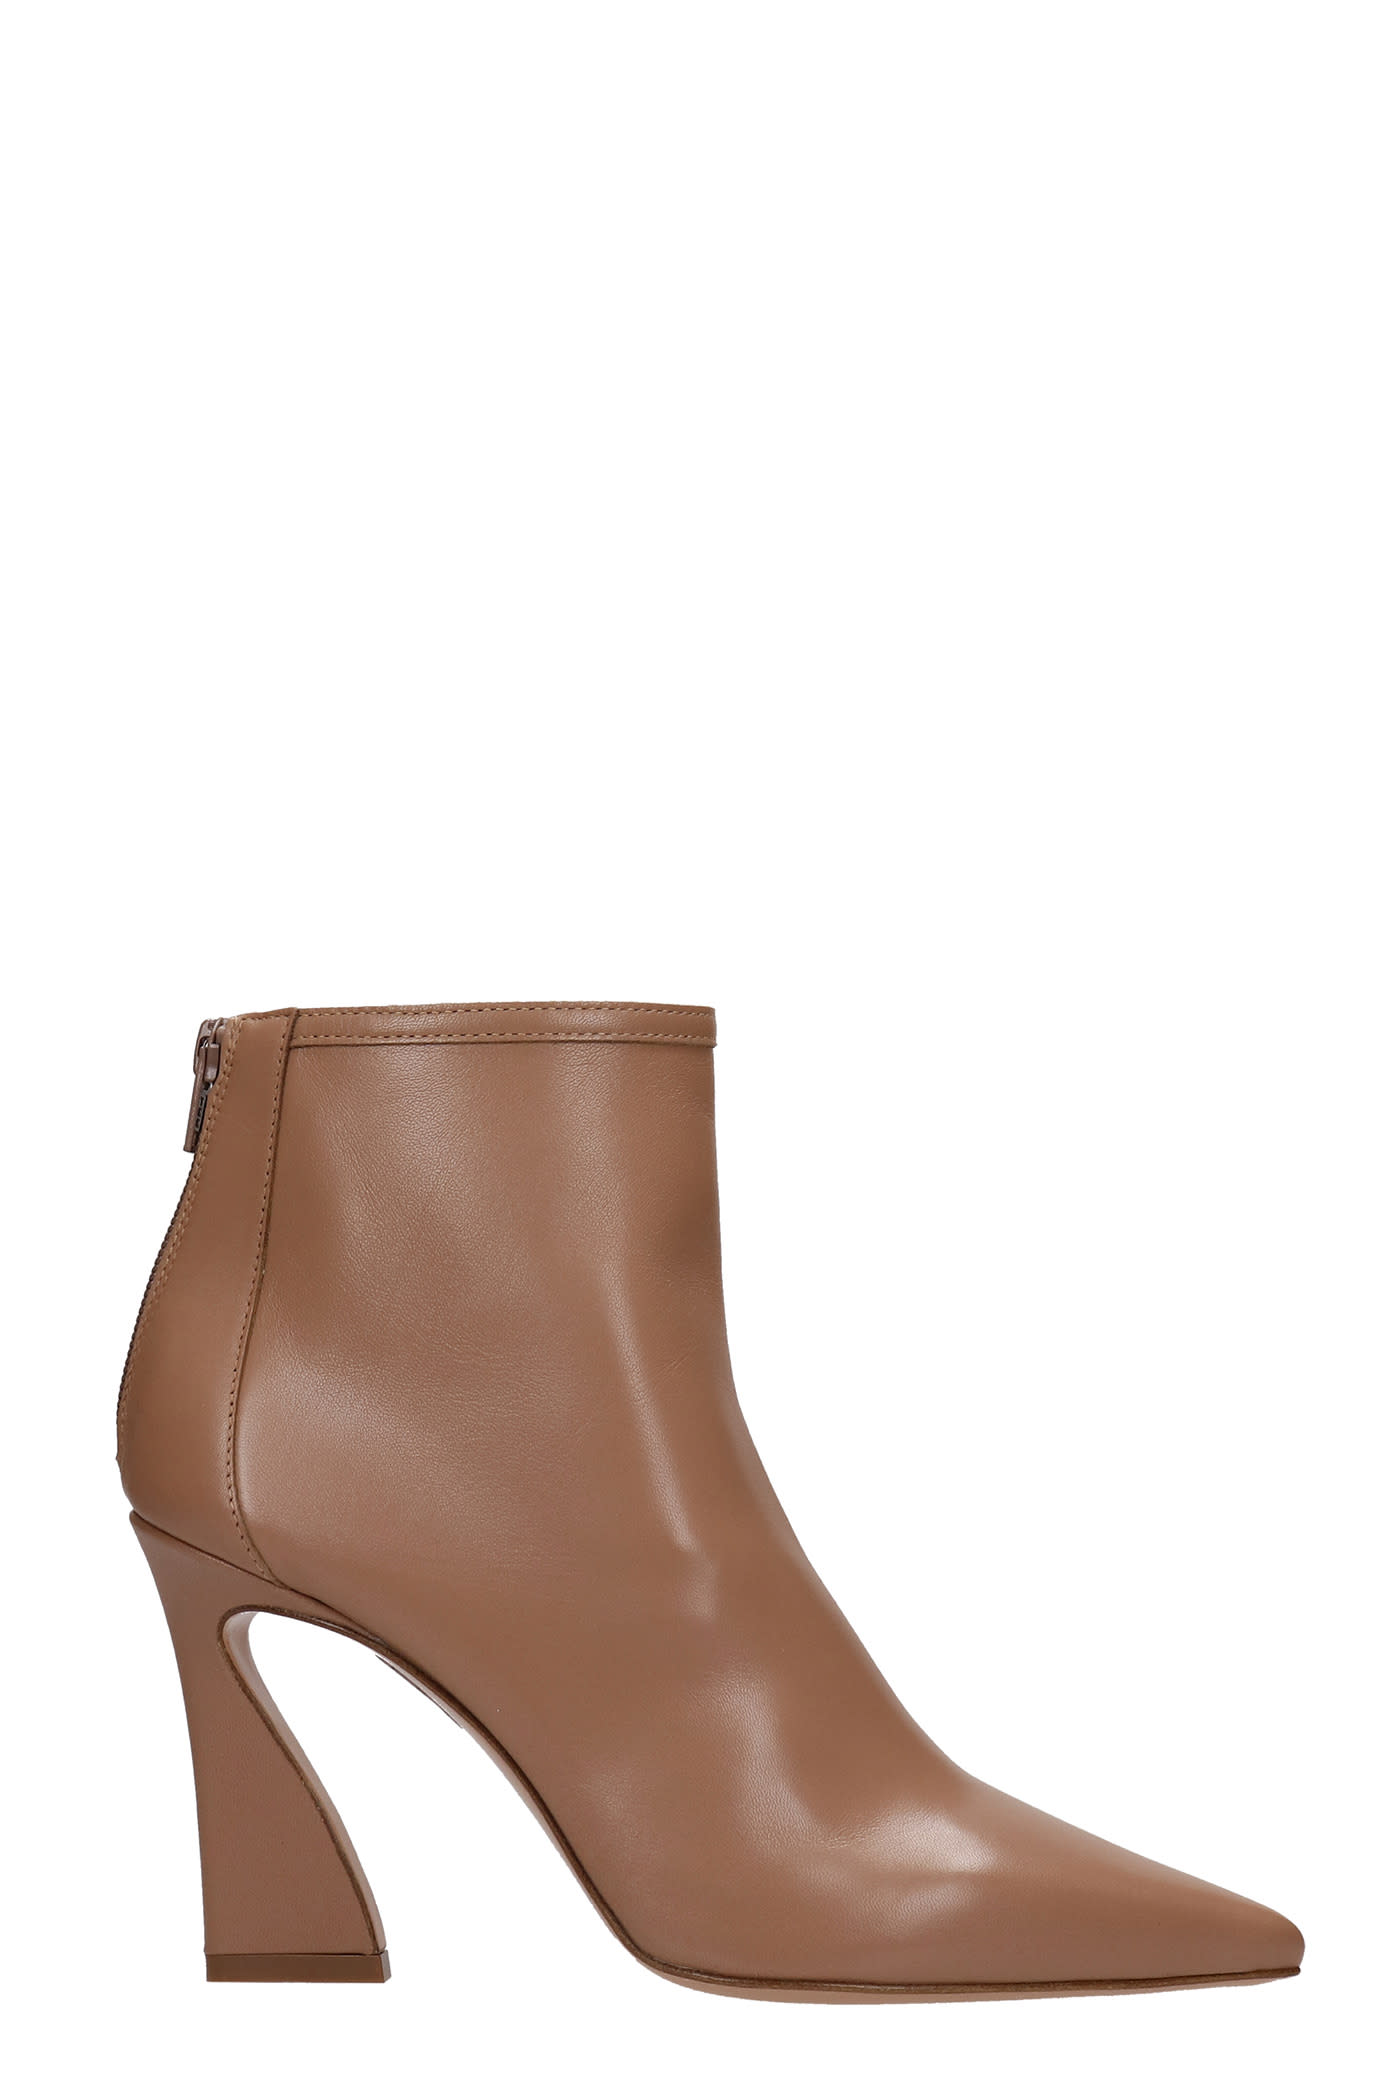 Anna F. High Heels Ankle Boots In Camel Leather